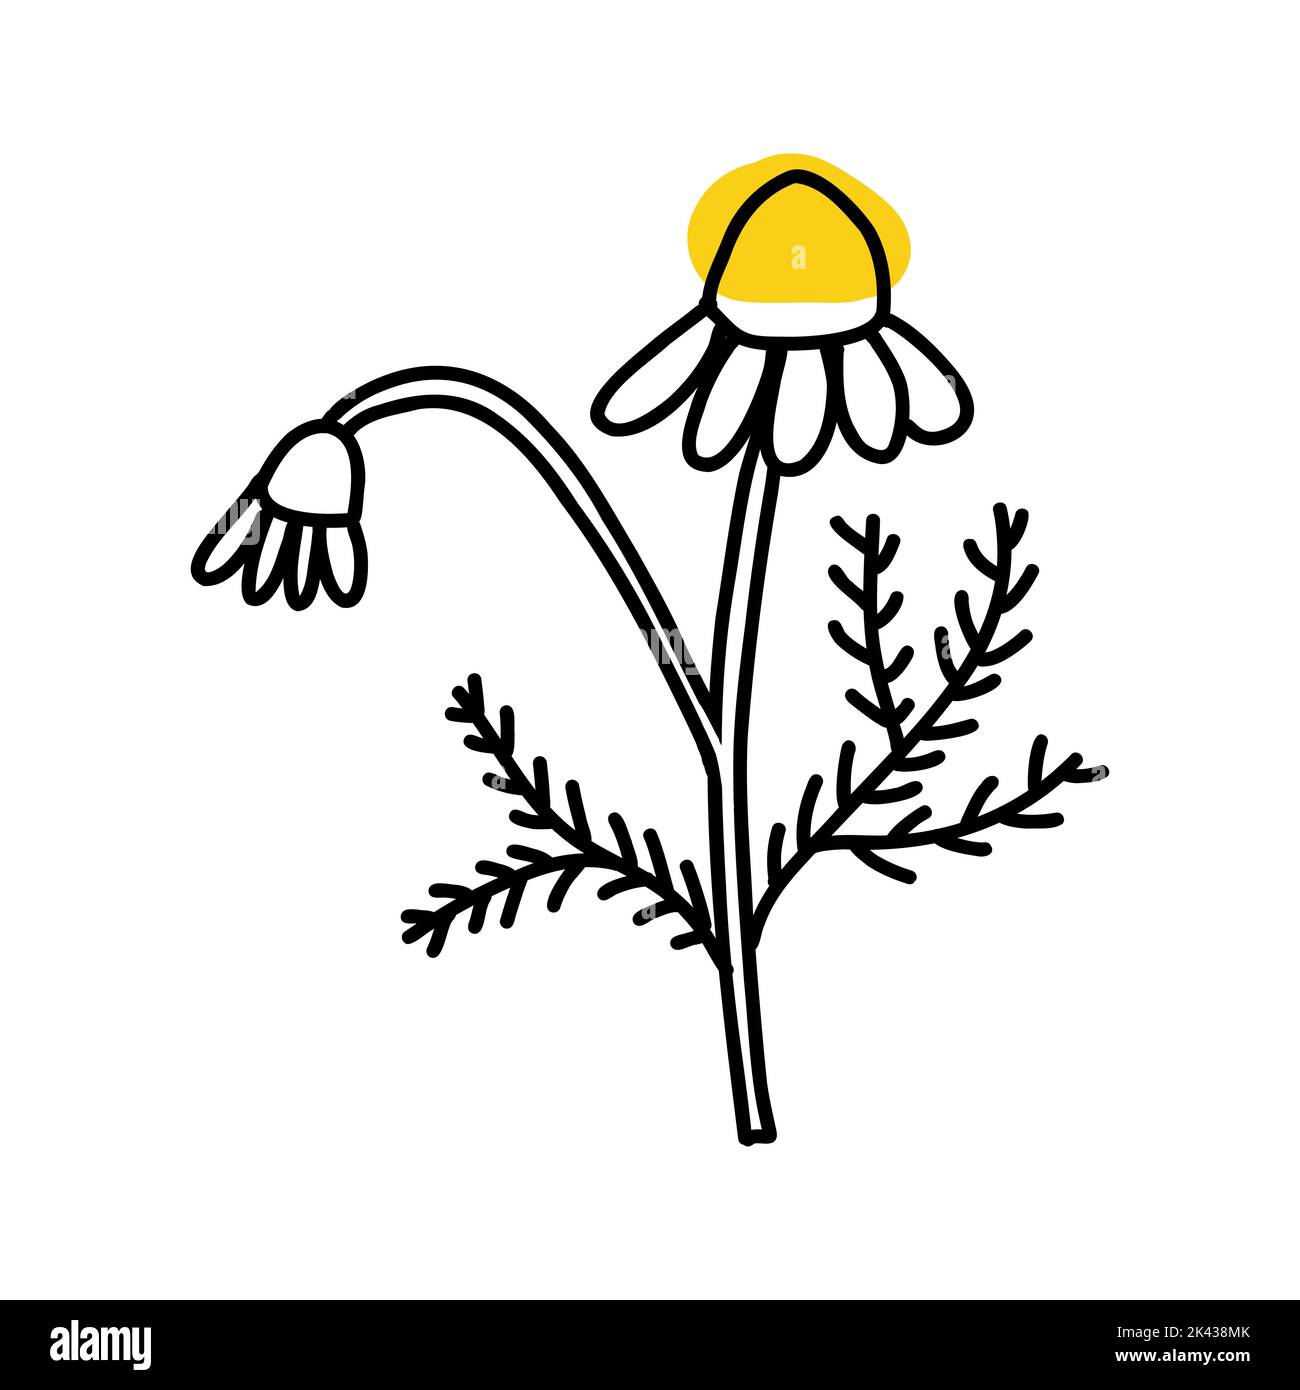 Daisy flower funny Stock Vector Images - Page 2 - Alamy